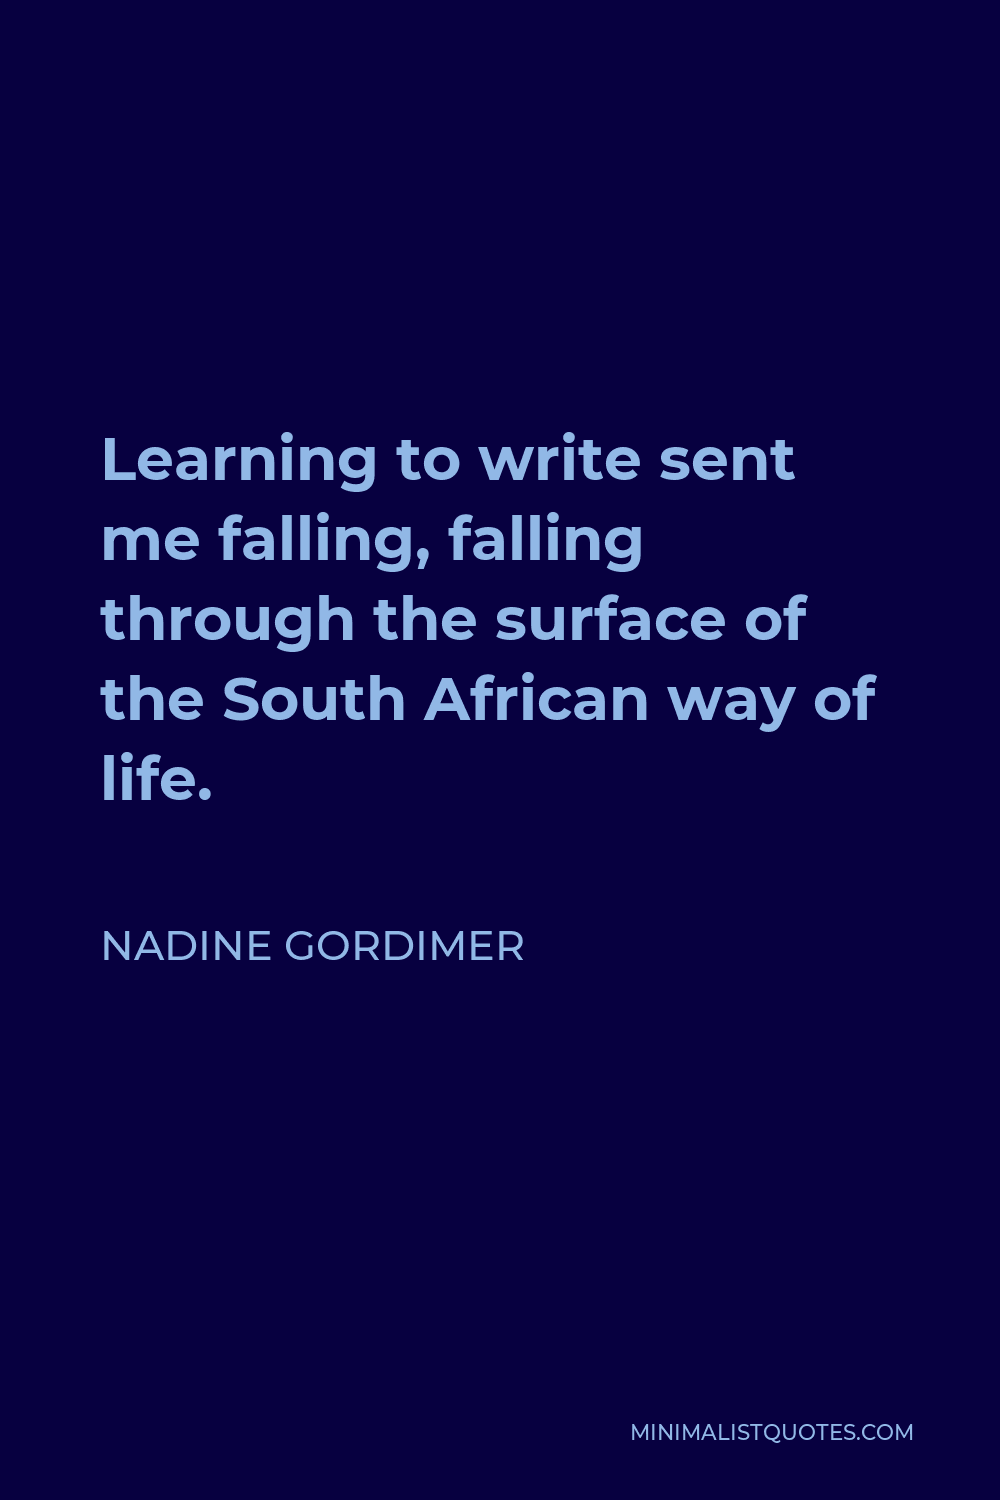 Nadine Gordimer Quote - Learning to write sent me falling, falling through the surface of the South African way of life.